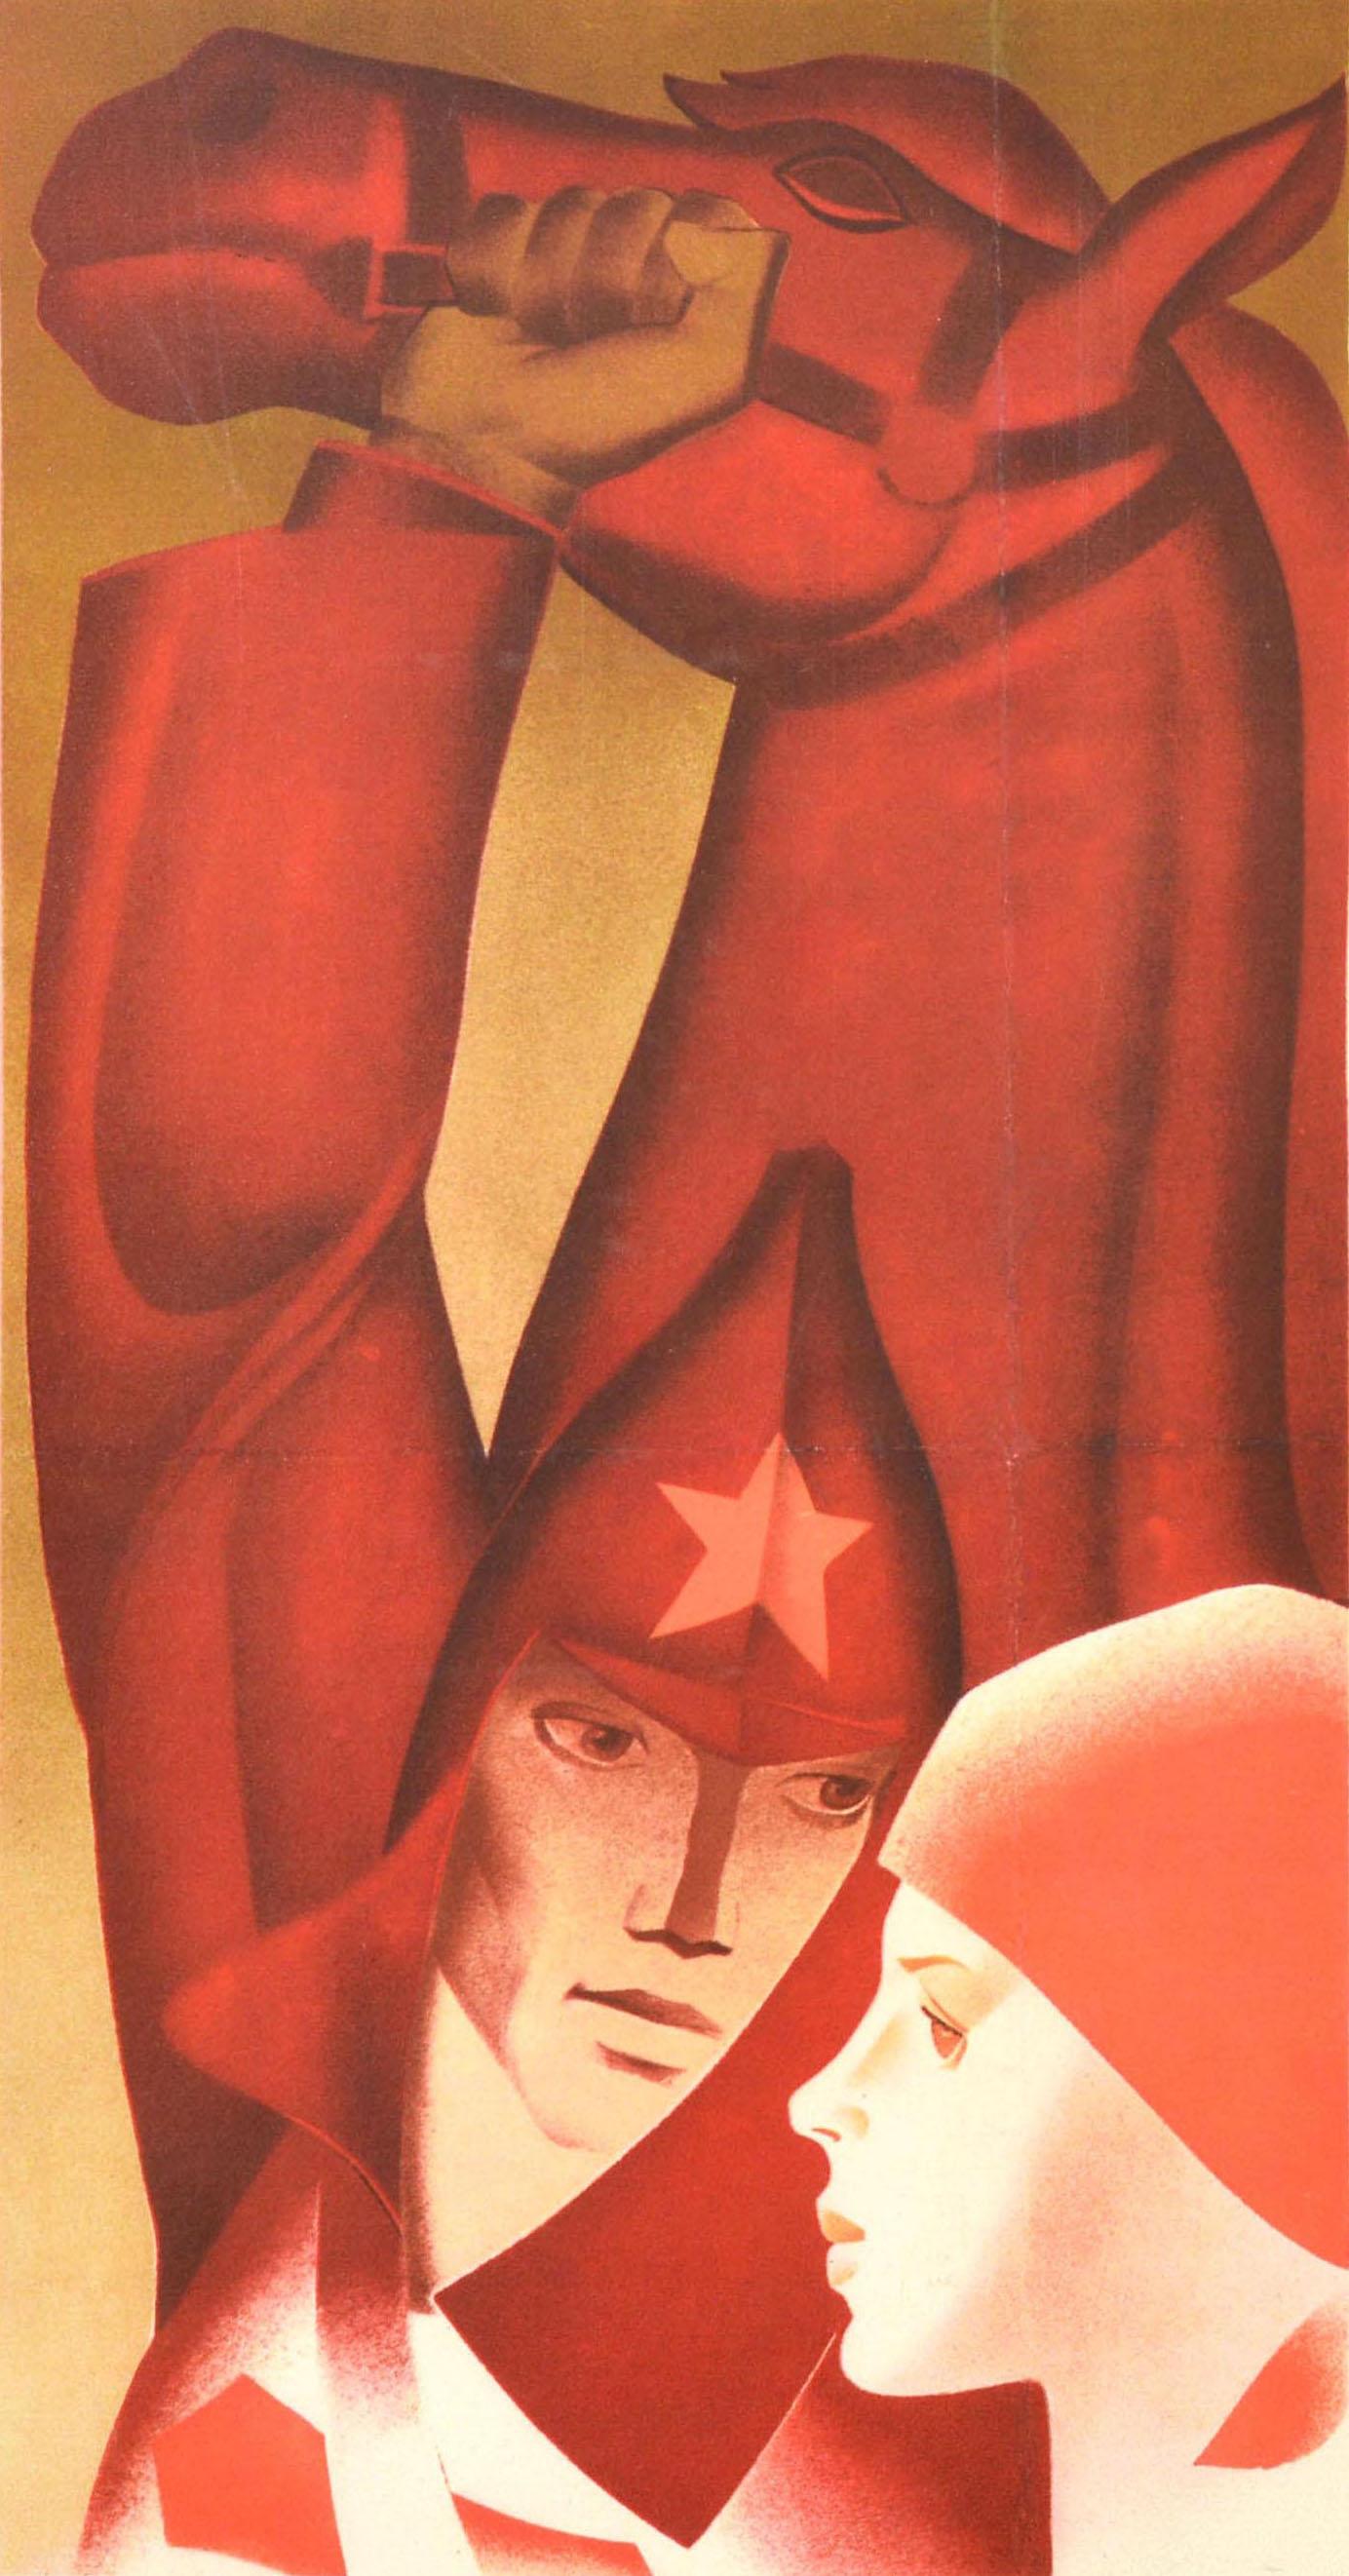 Original vintage Soviet propaganda poster - Our Women are with us! - featuring the slogan below three images, the first depicting a young lady in front of a soldier wearing a budenovka style hat with a red star on it and a horse in the background,